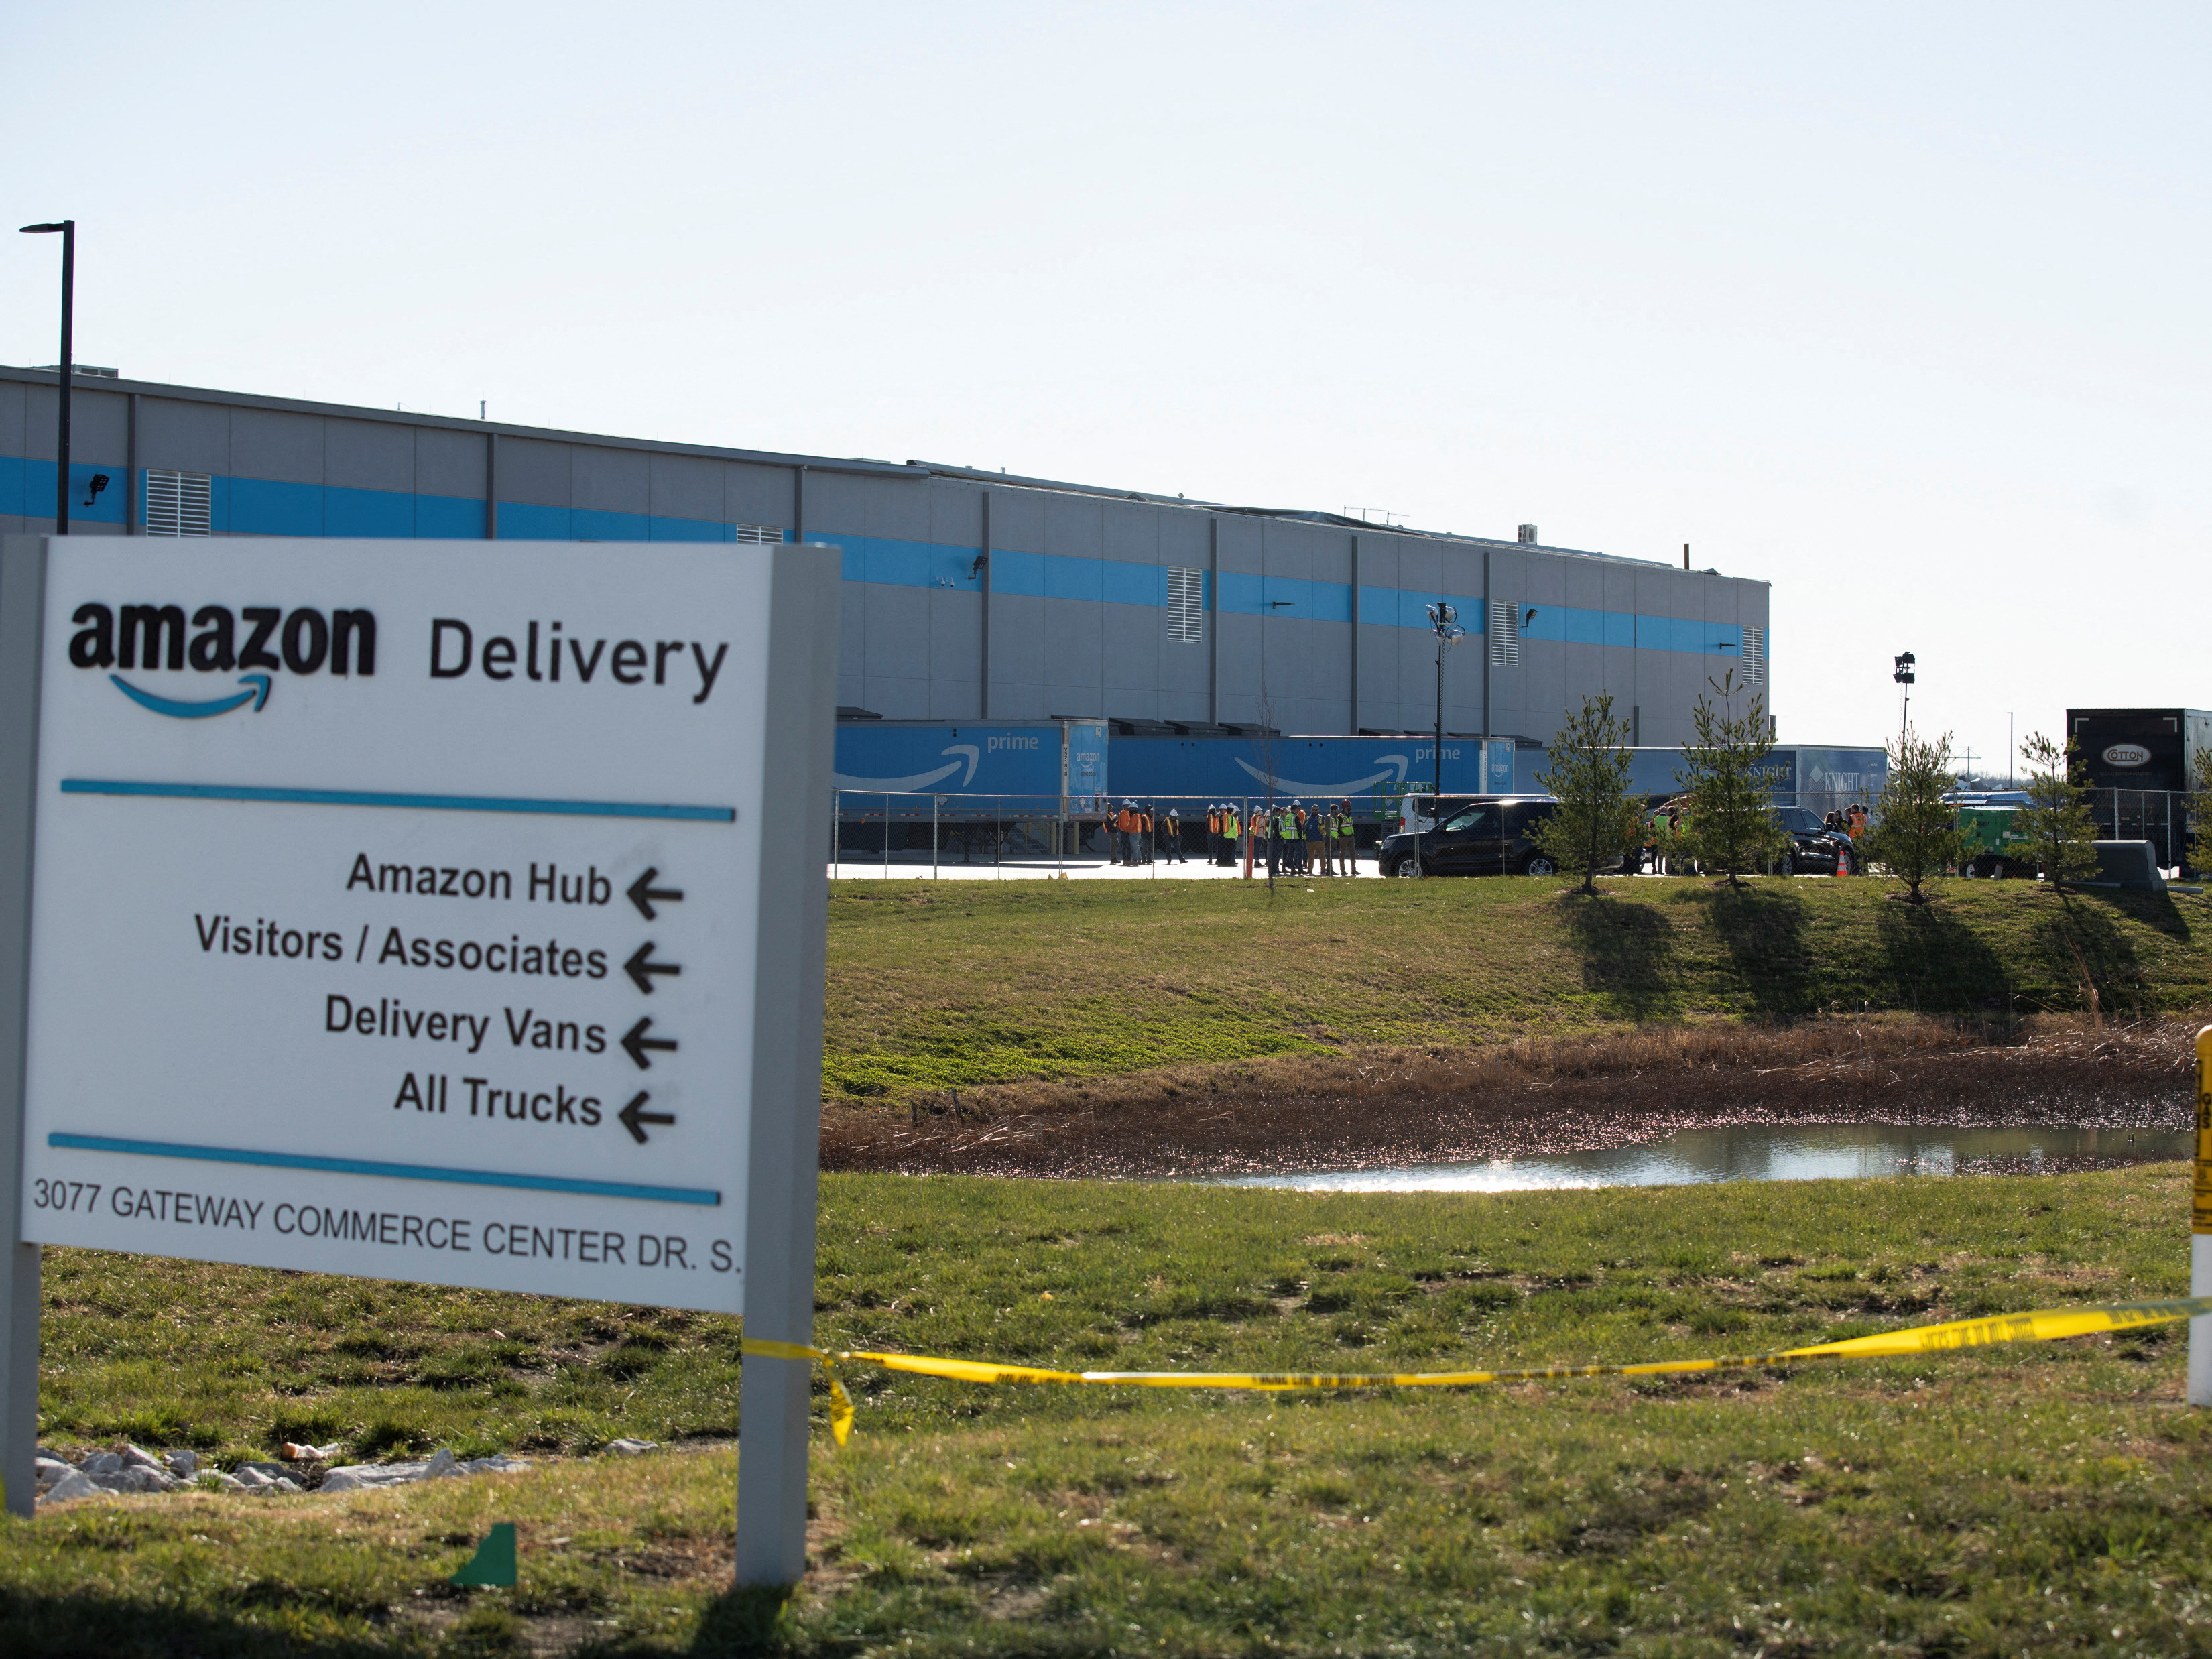 Emergency vehicles surround the site of a roof collapse at an Amazon distribution center in Edwardsville